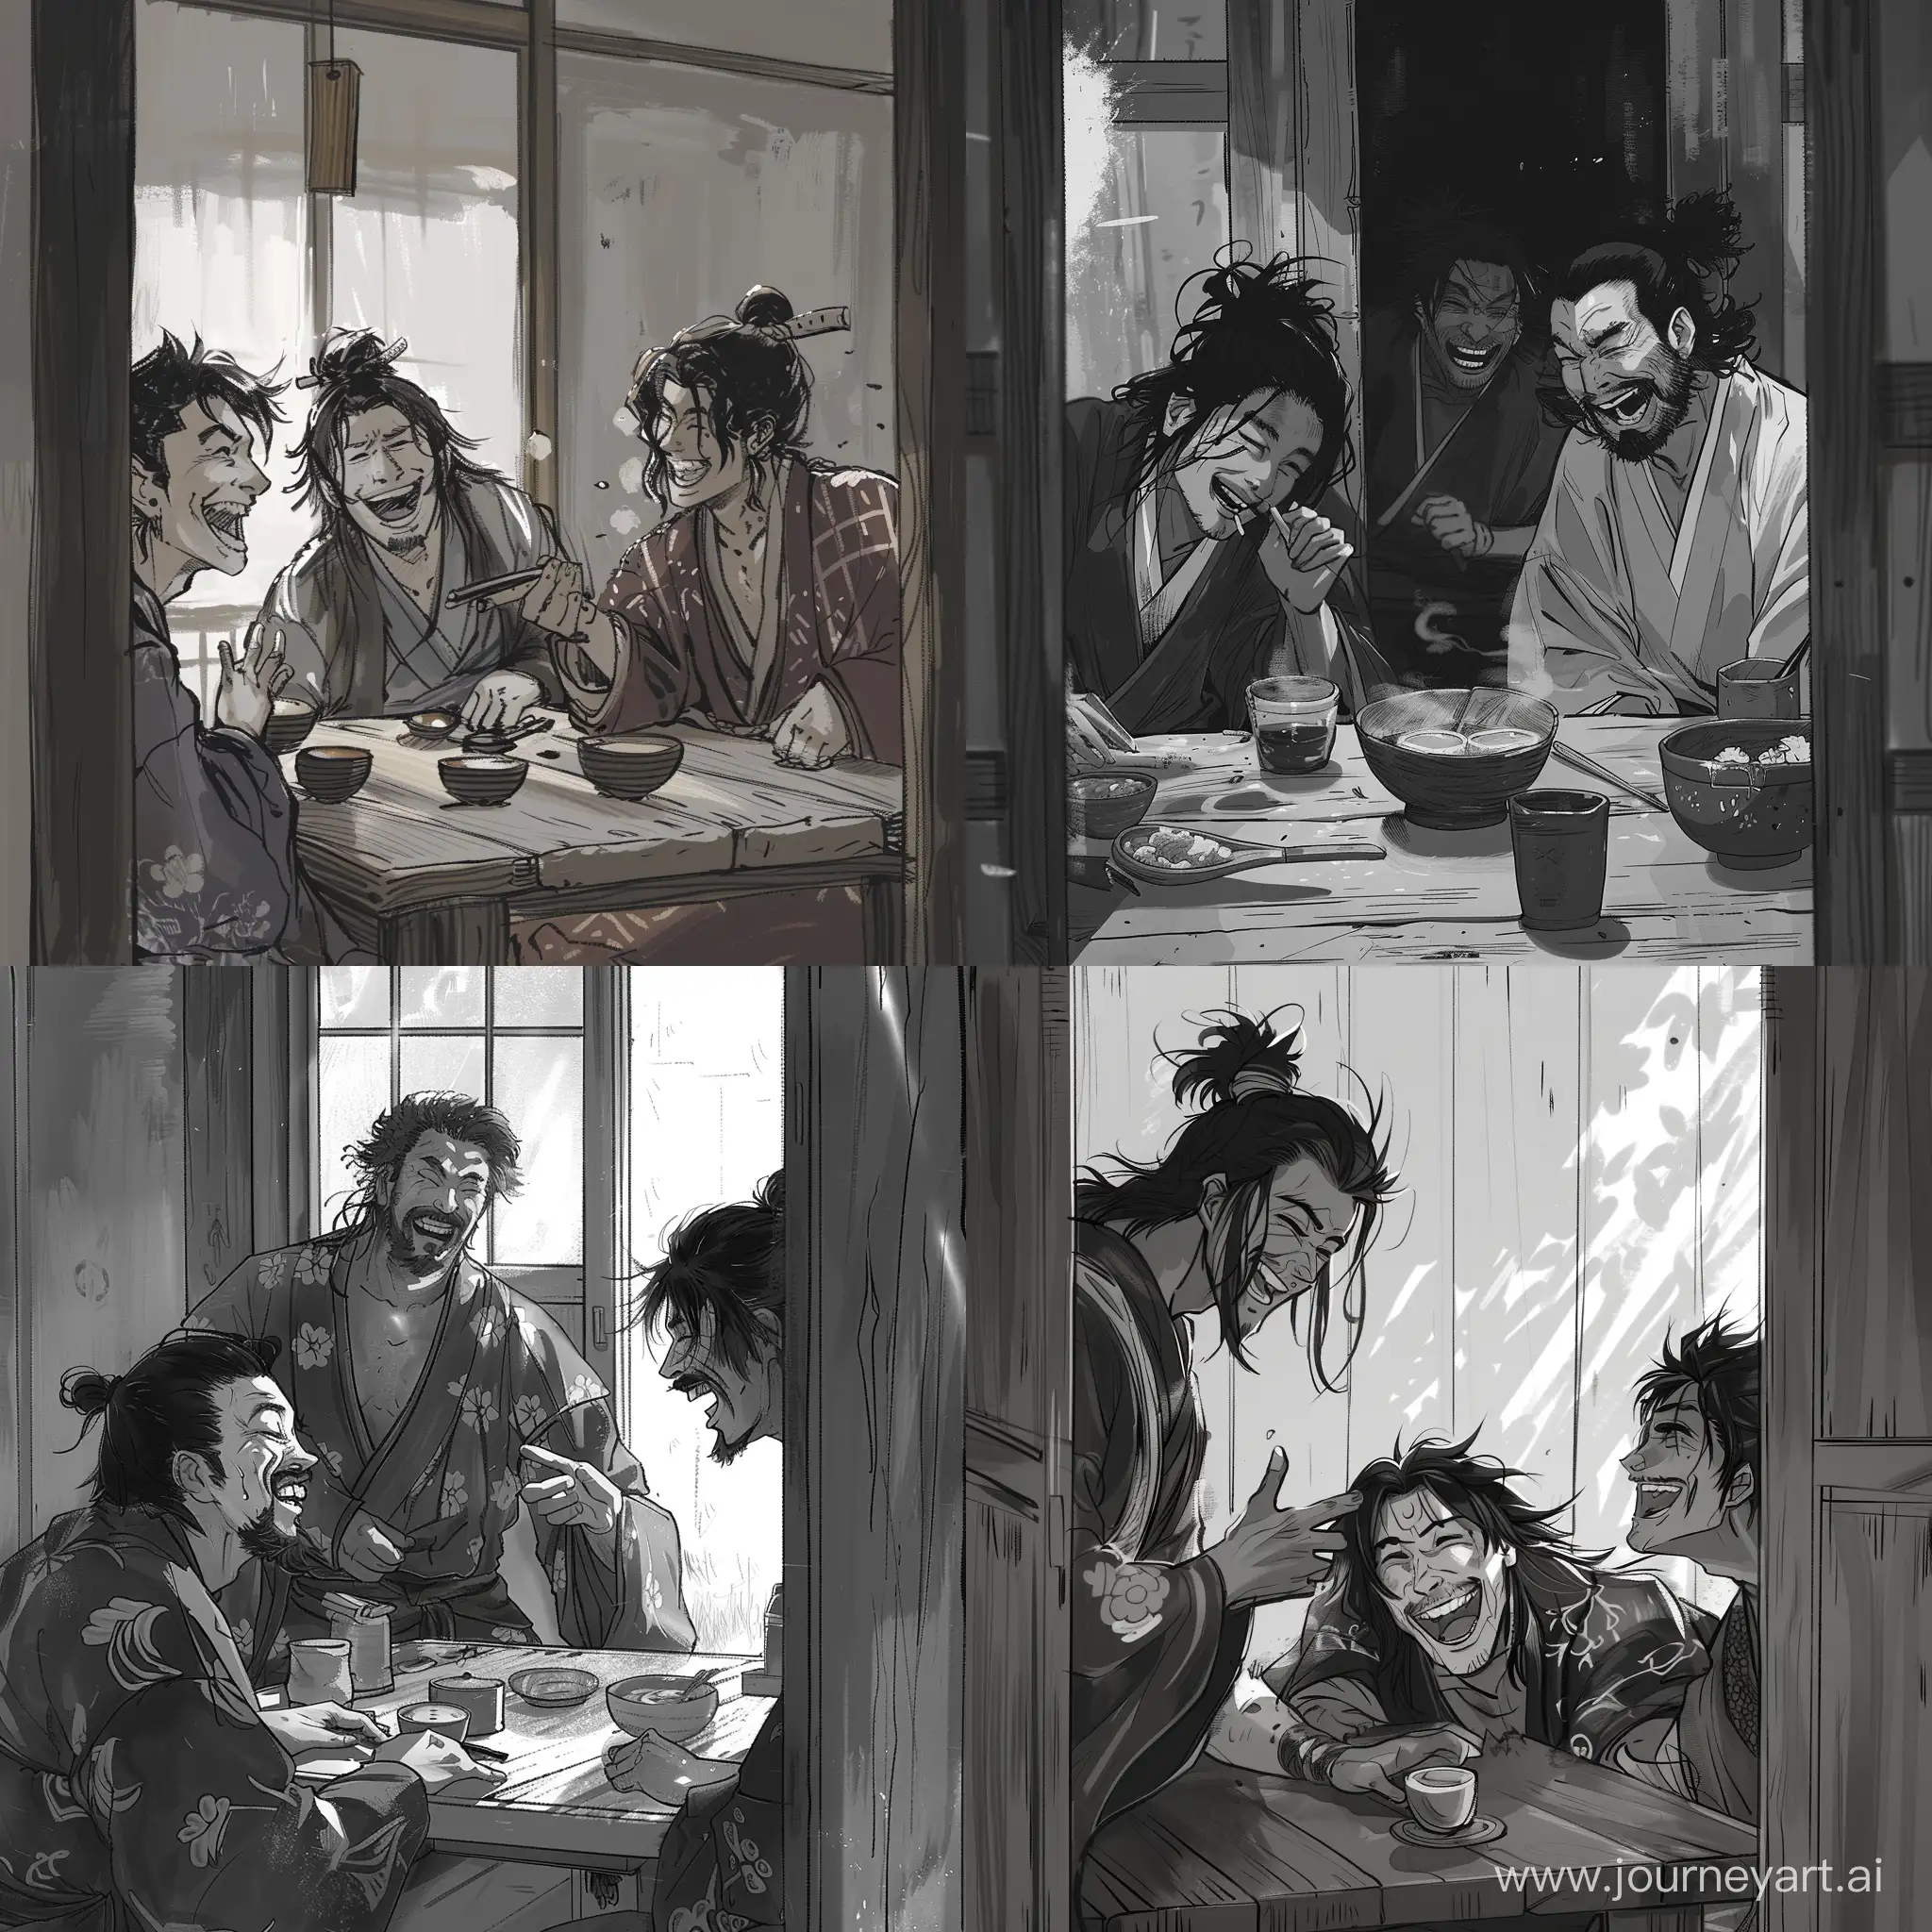 Mythical-Gathering-Susanoo-Tso-Jumong-and-Utes-Brother-Sharing-a-Laugh-Around-a-Table